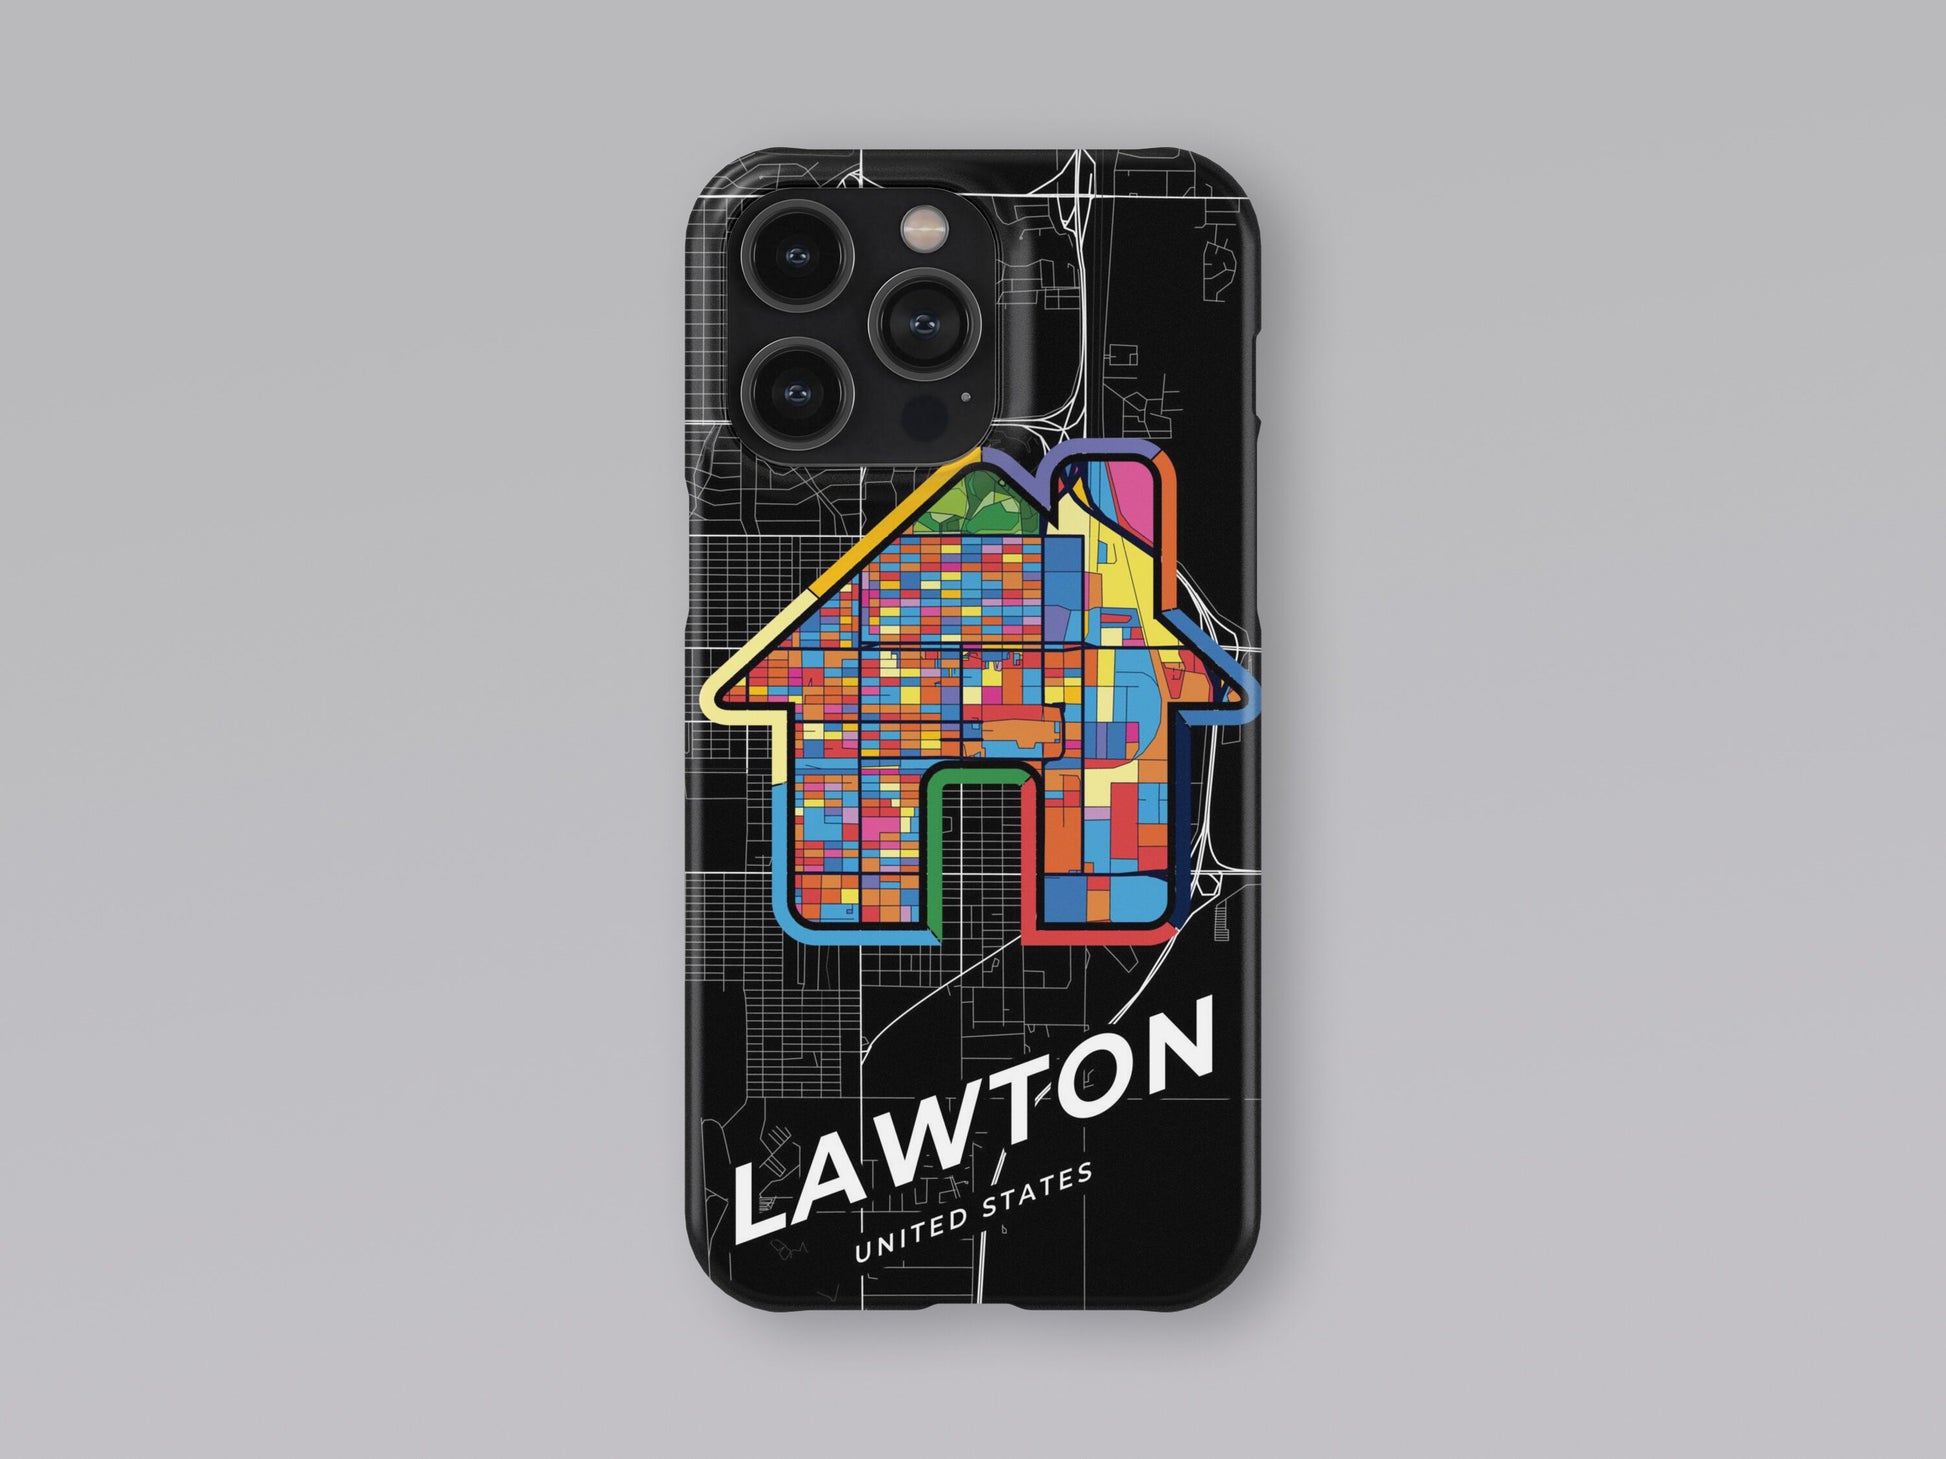 Lawton Oklahoma slim phone case with colorful icon. Birthday, wedding or housewarming gift. Couple match cases. 3